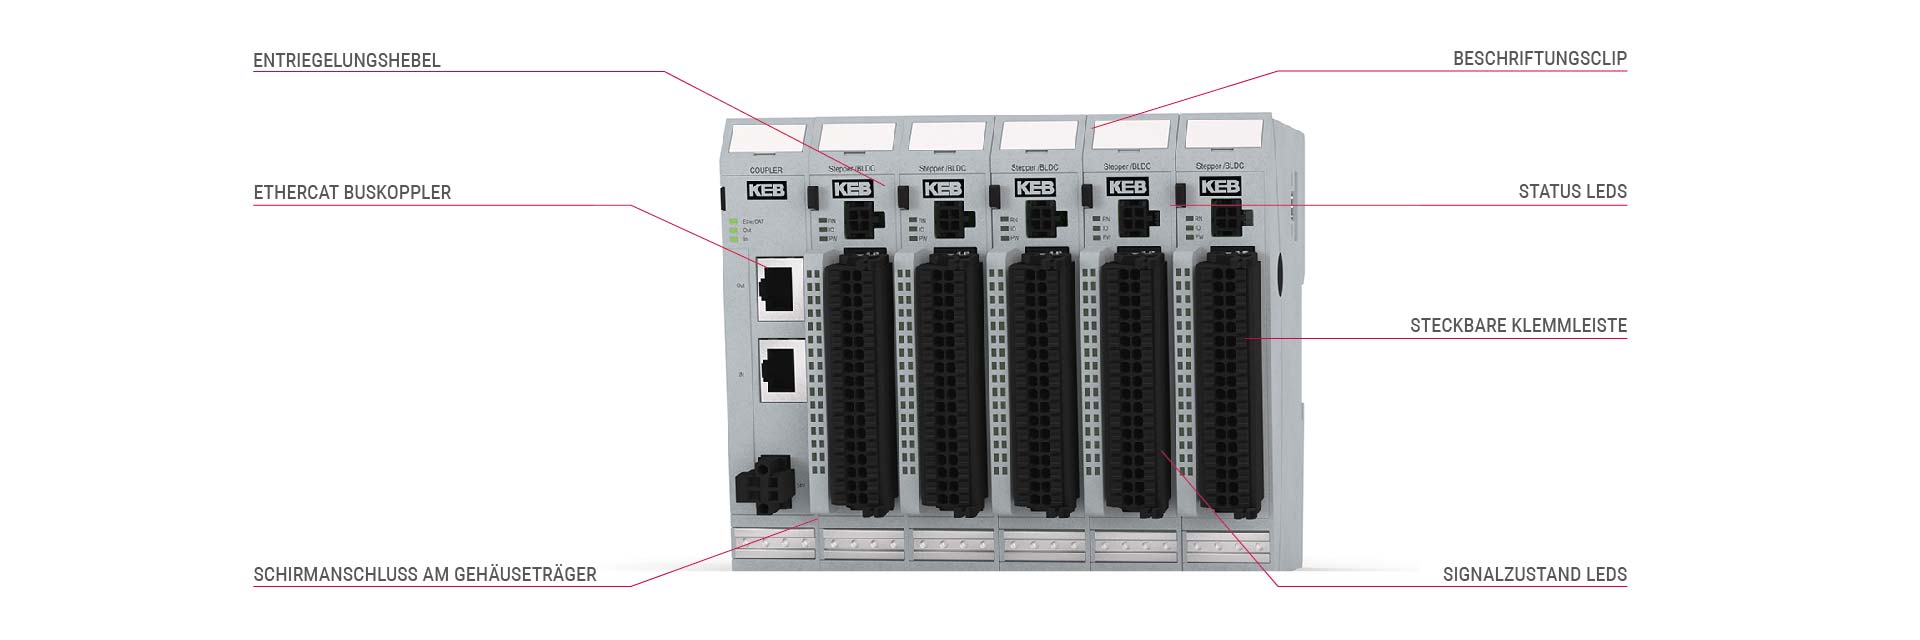 Produktdarstellung mit Features des C6 Remote I/O-Systems